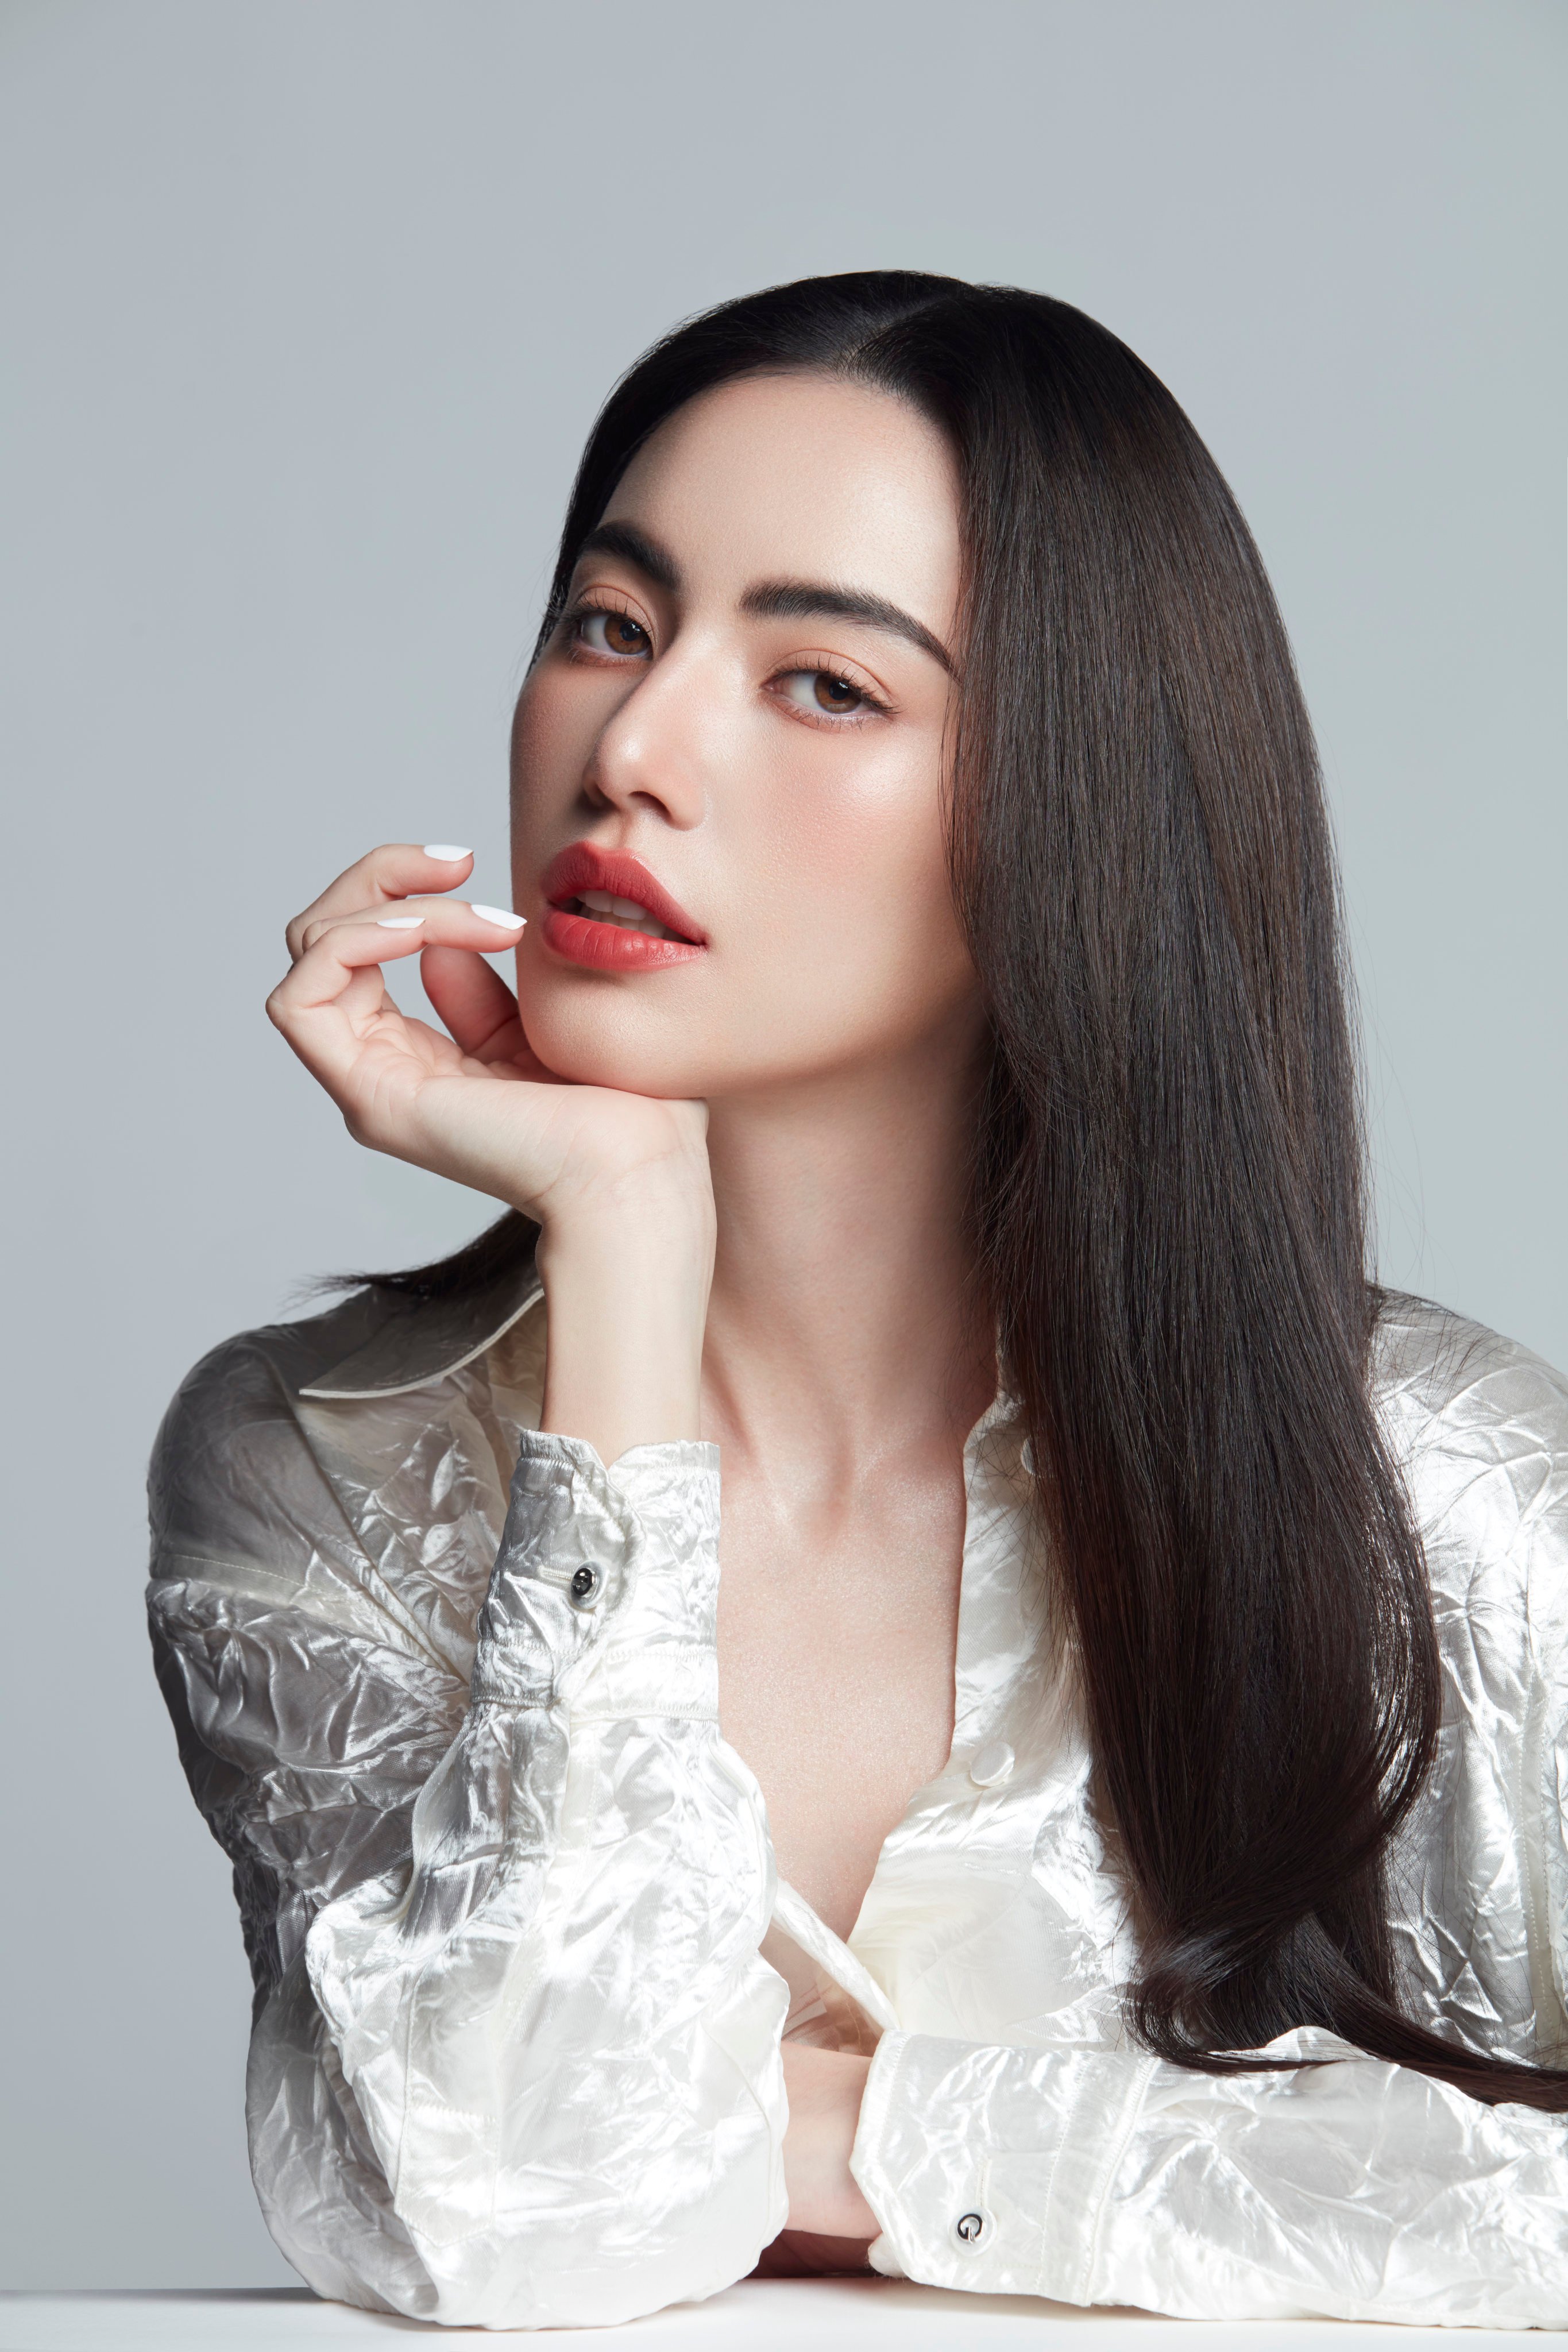 Davika Hoorne, one of Thailand’s hottest actors and most beautiful faces, has become the first Thai ambassador for Gucci, including Gucci Beauty. Photo: Gucci